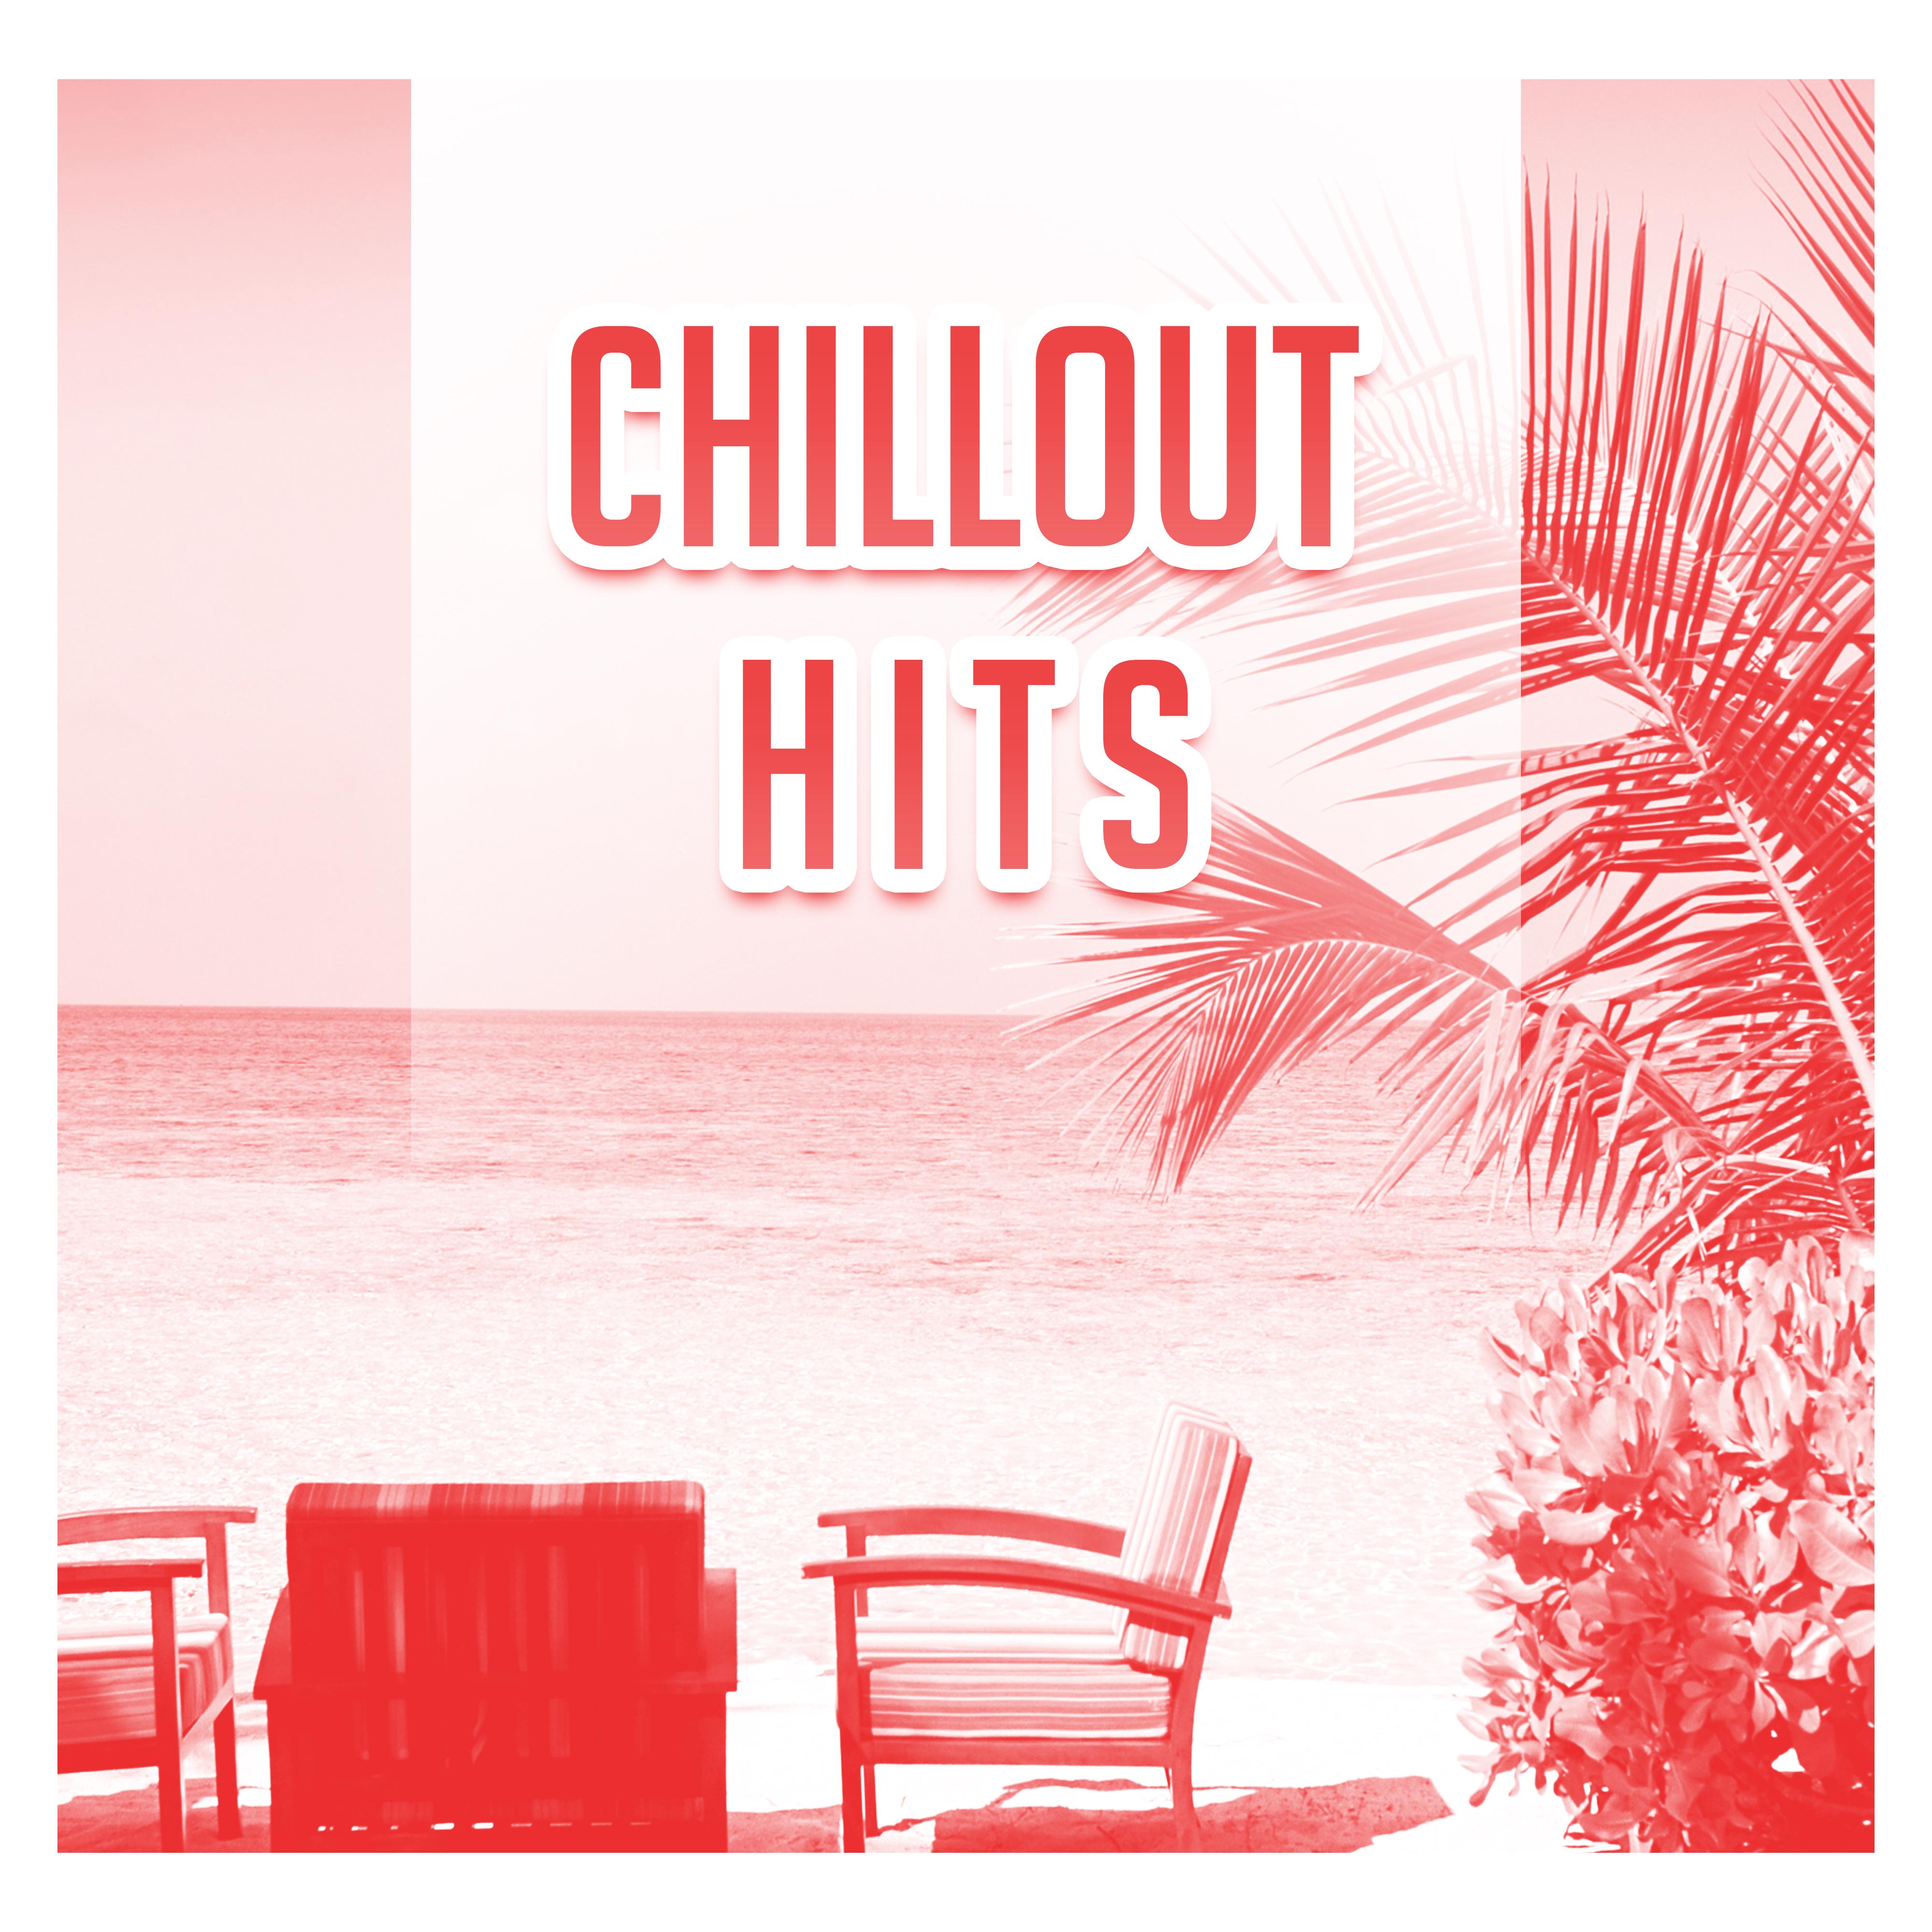 Chillout Hits – Summer Chill, Good Vibes, Holiday Chill Out Music, Party Time, Total Relax, Summertime